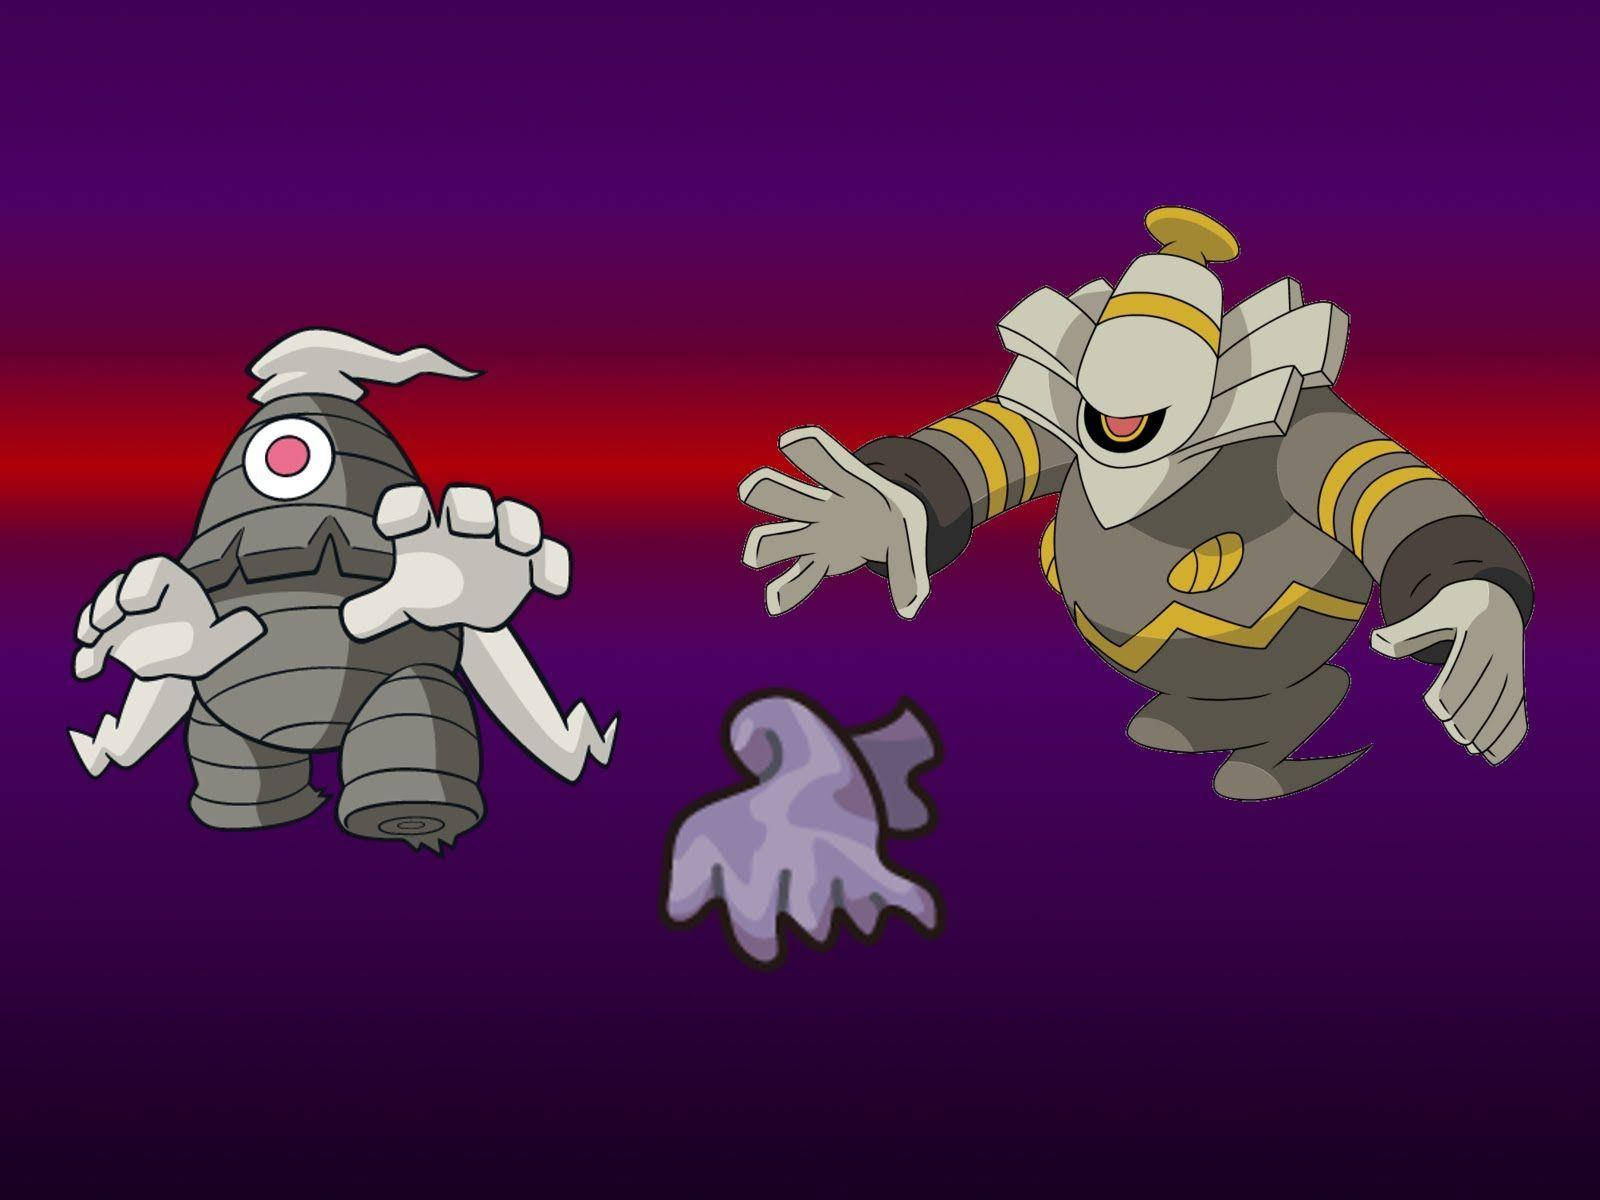 Dusknoir And Dusclops Side-by-side Background